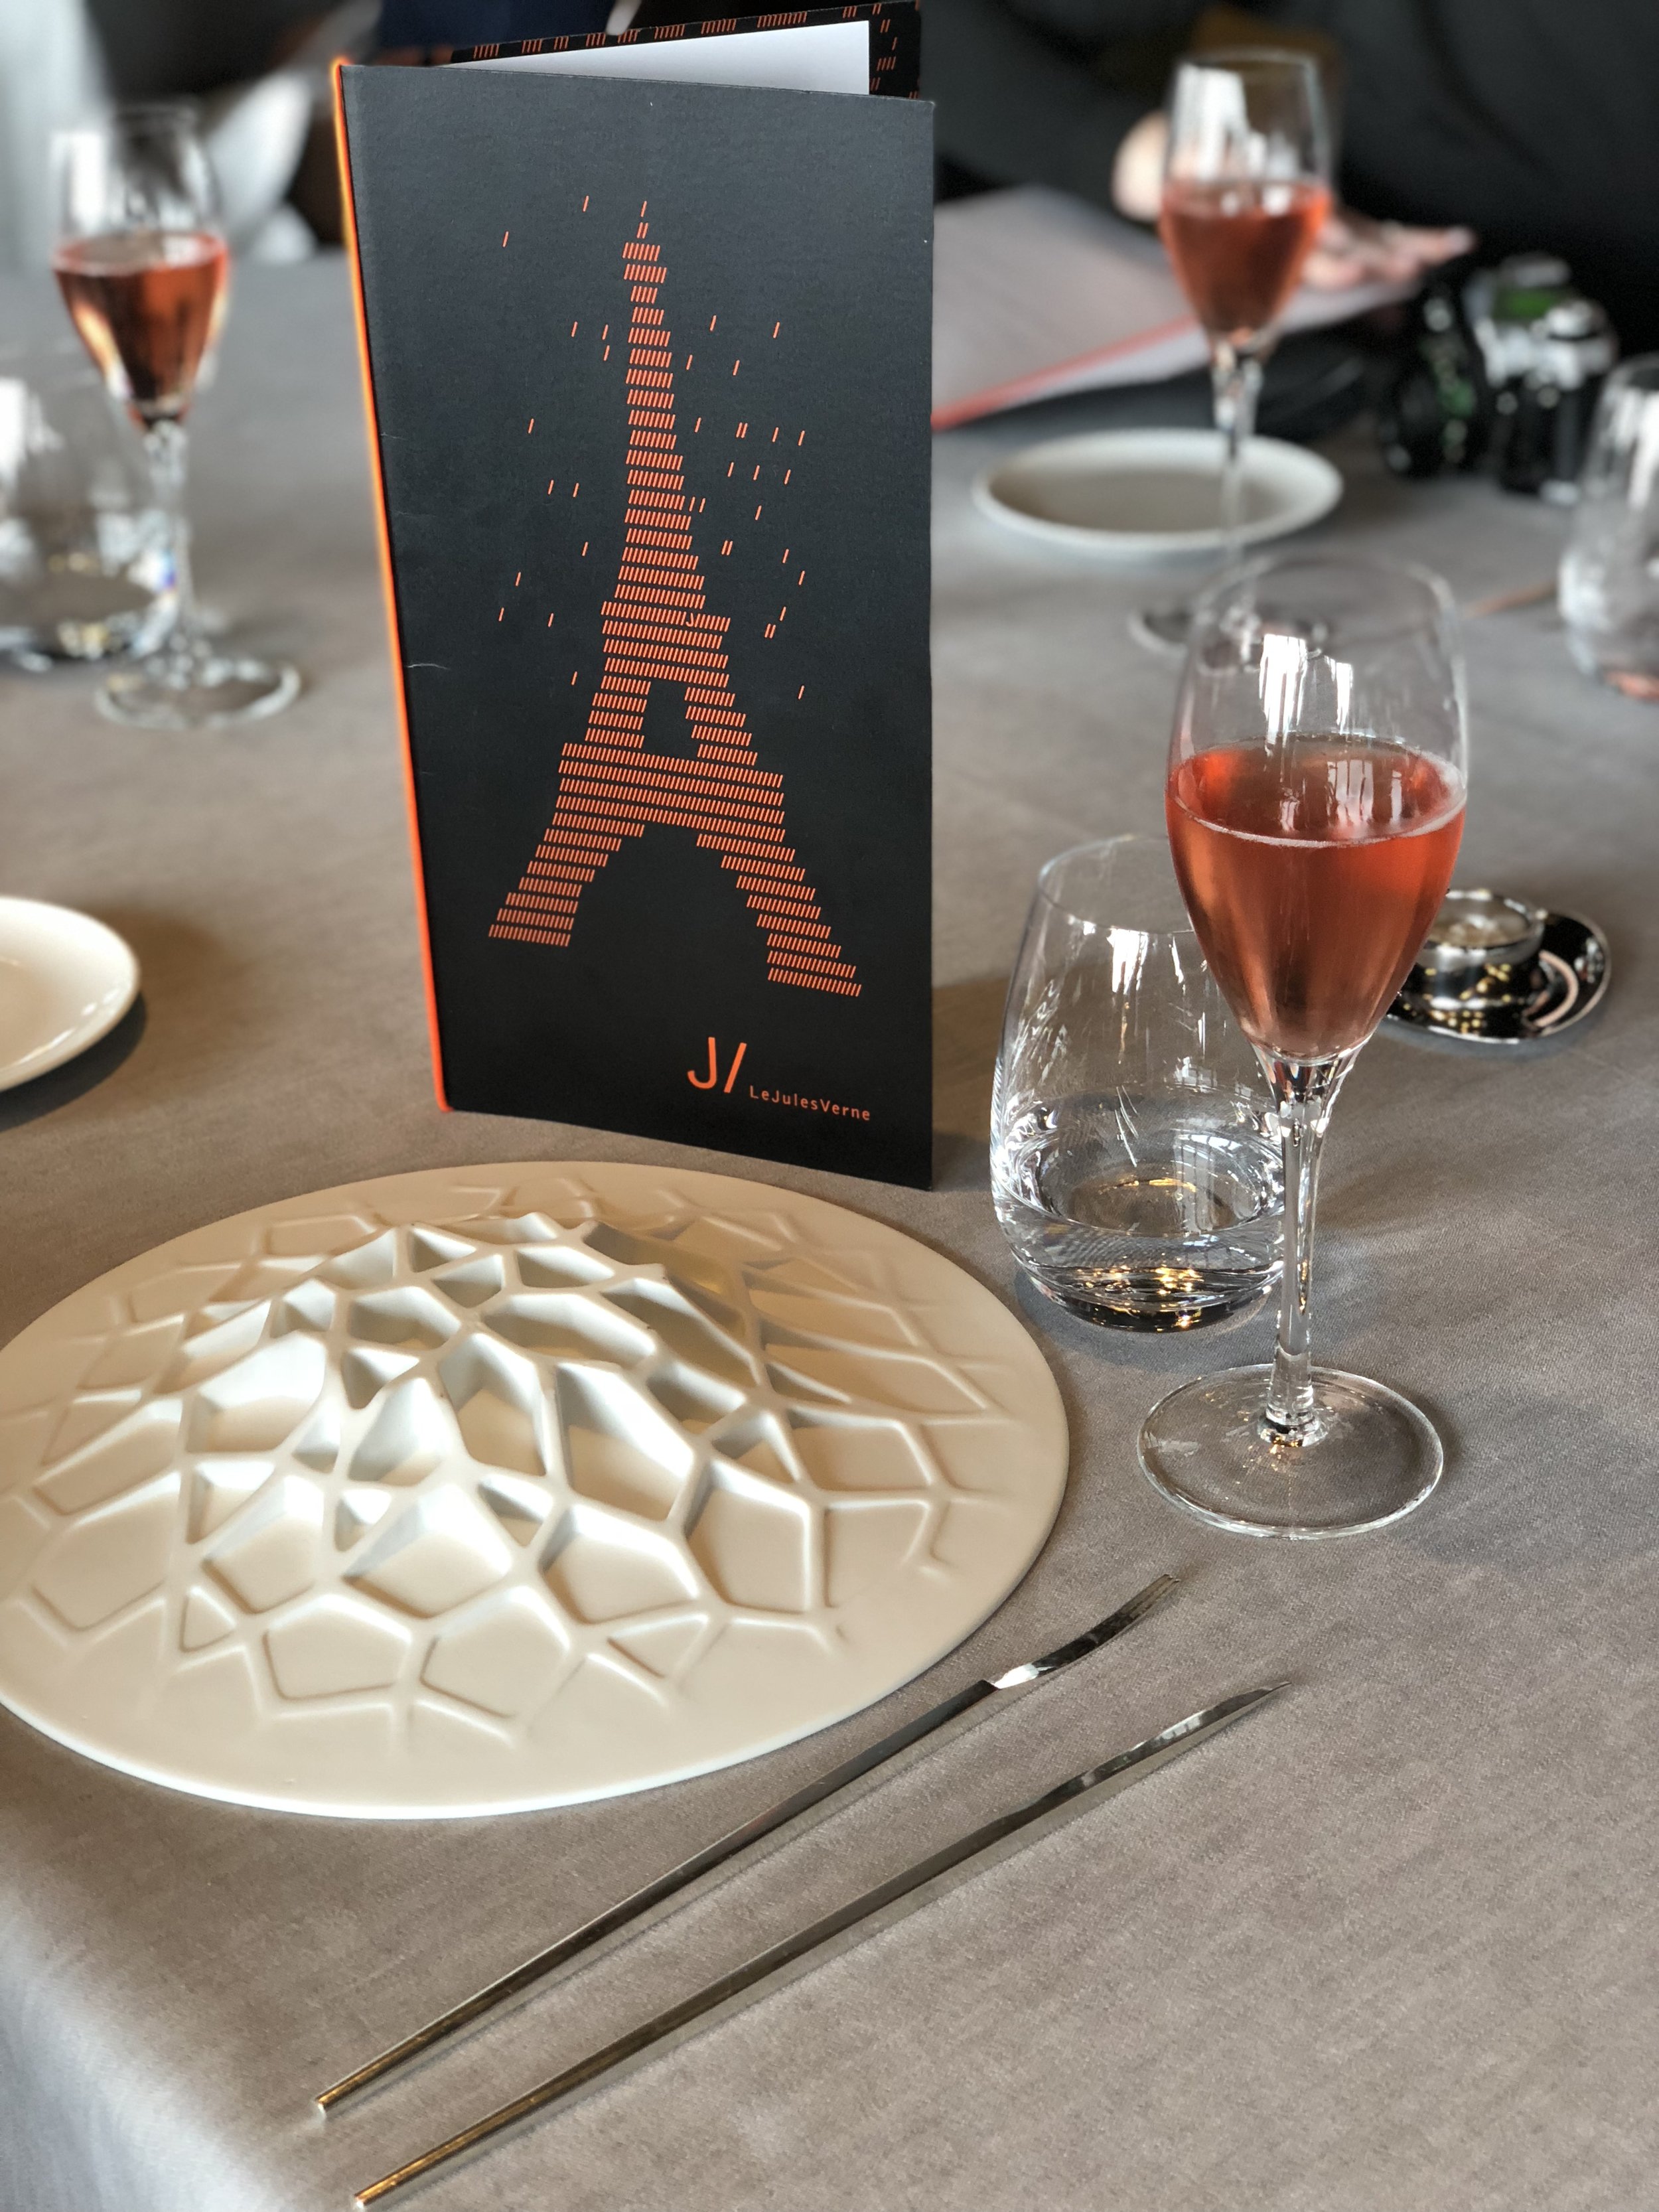 Lunch at Le Jules Verne in the Eiffel Tower